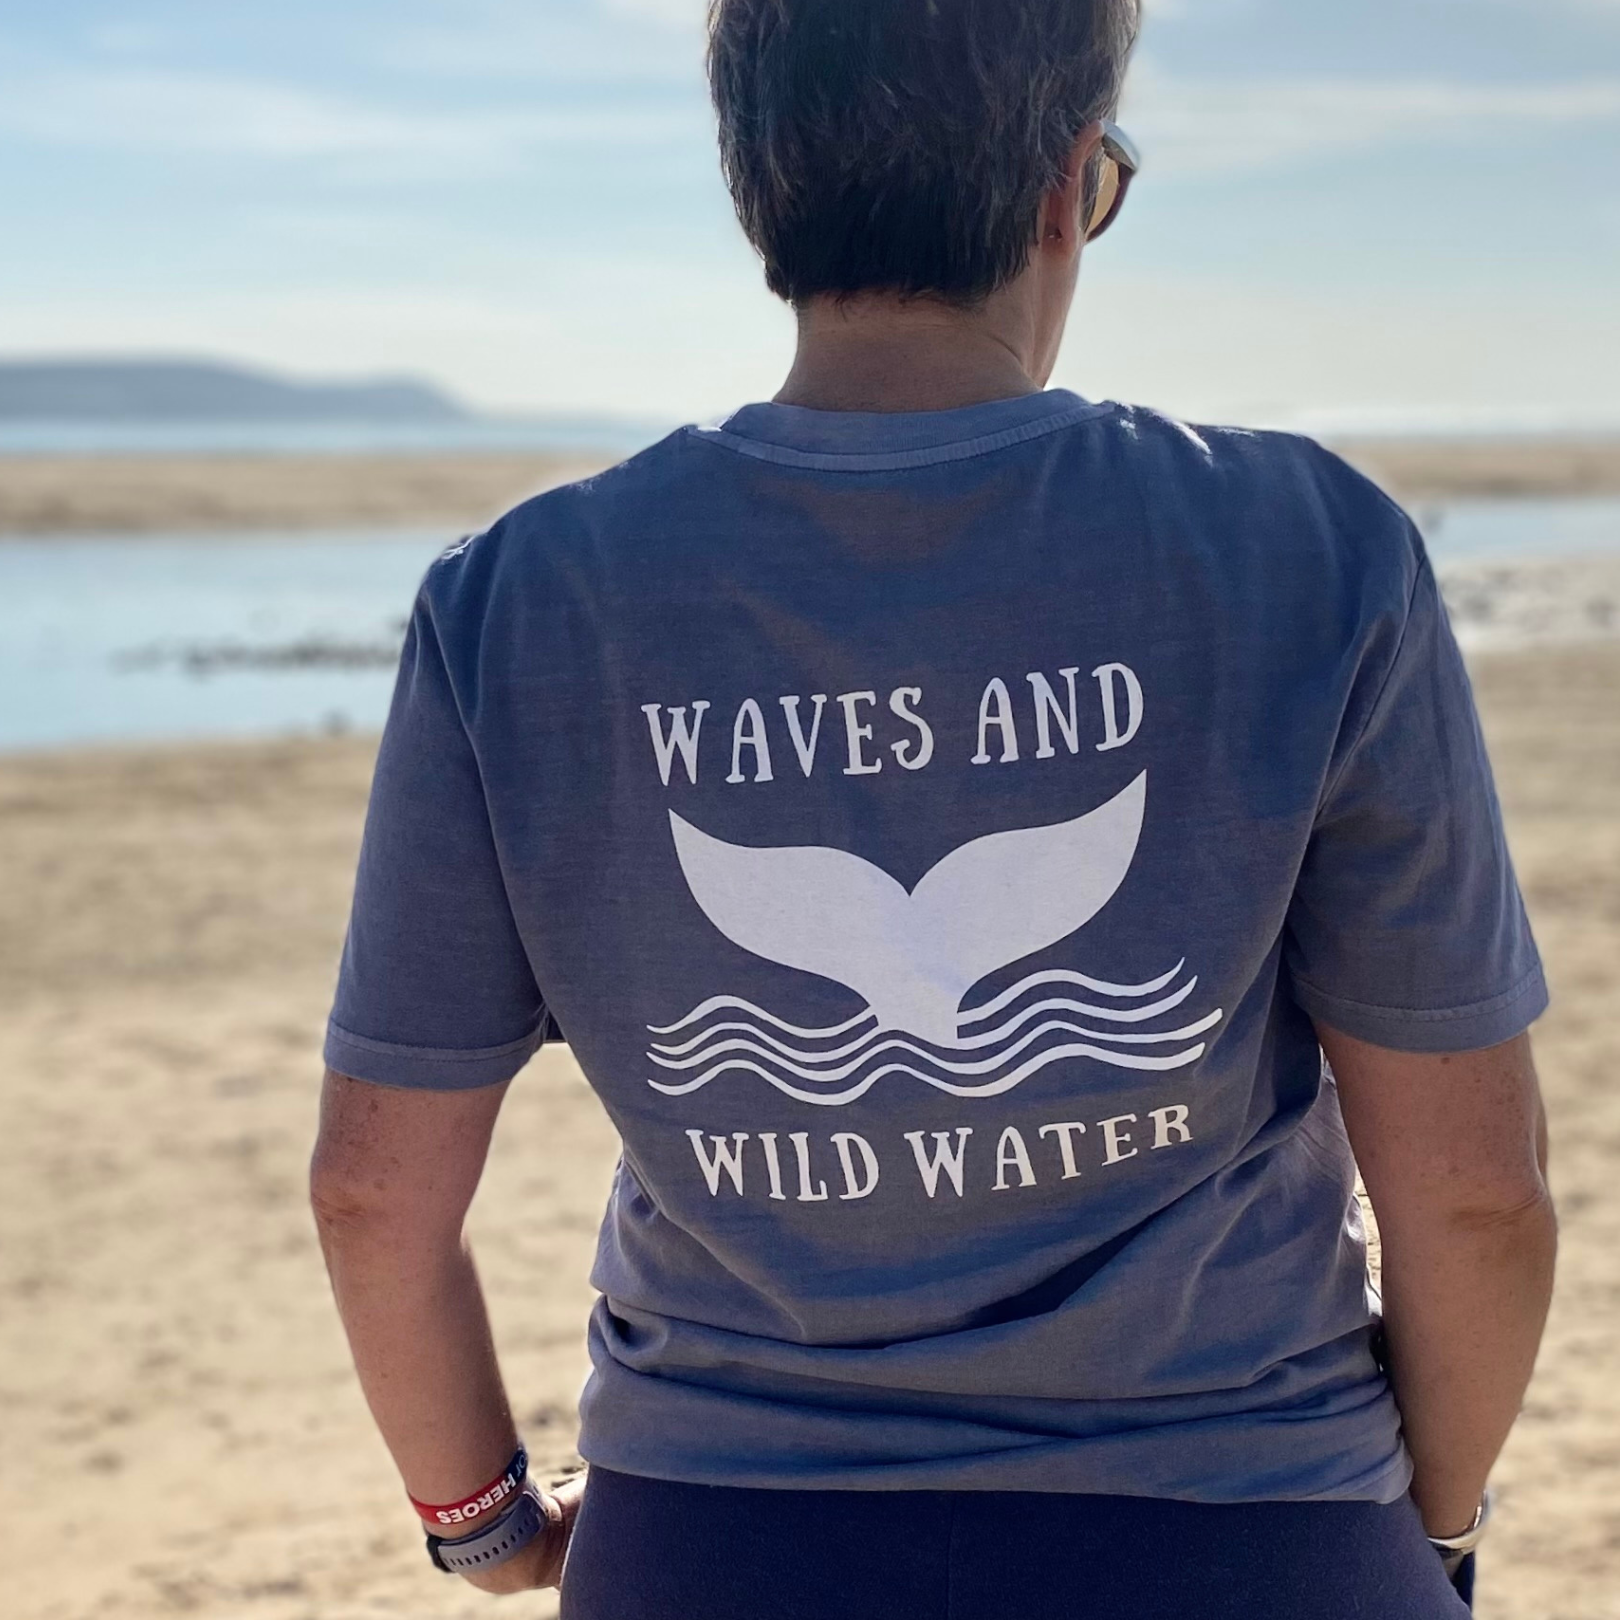 The back of a woman wearing a grey t-shirt with Waves & Wild Water logo, depicting a whale tail coming out of waves, printed in white ink.